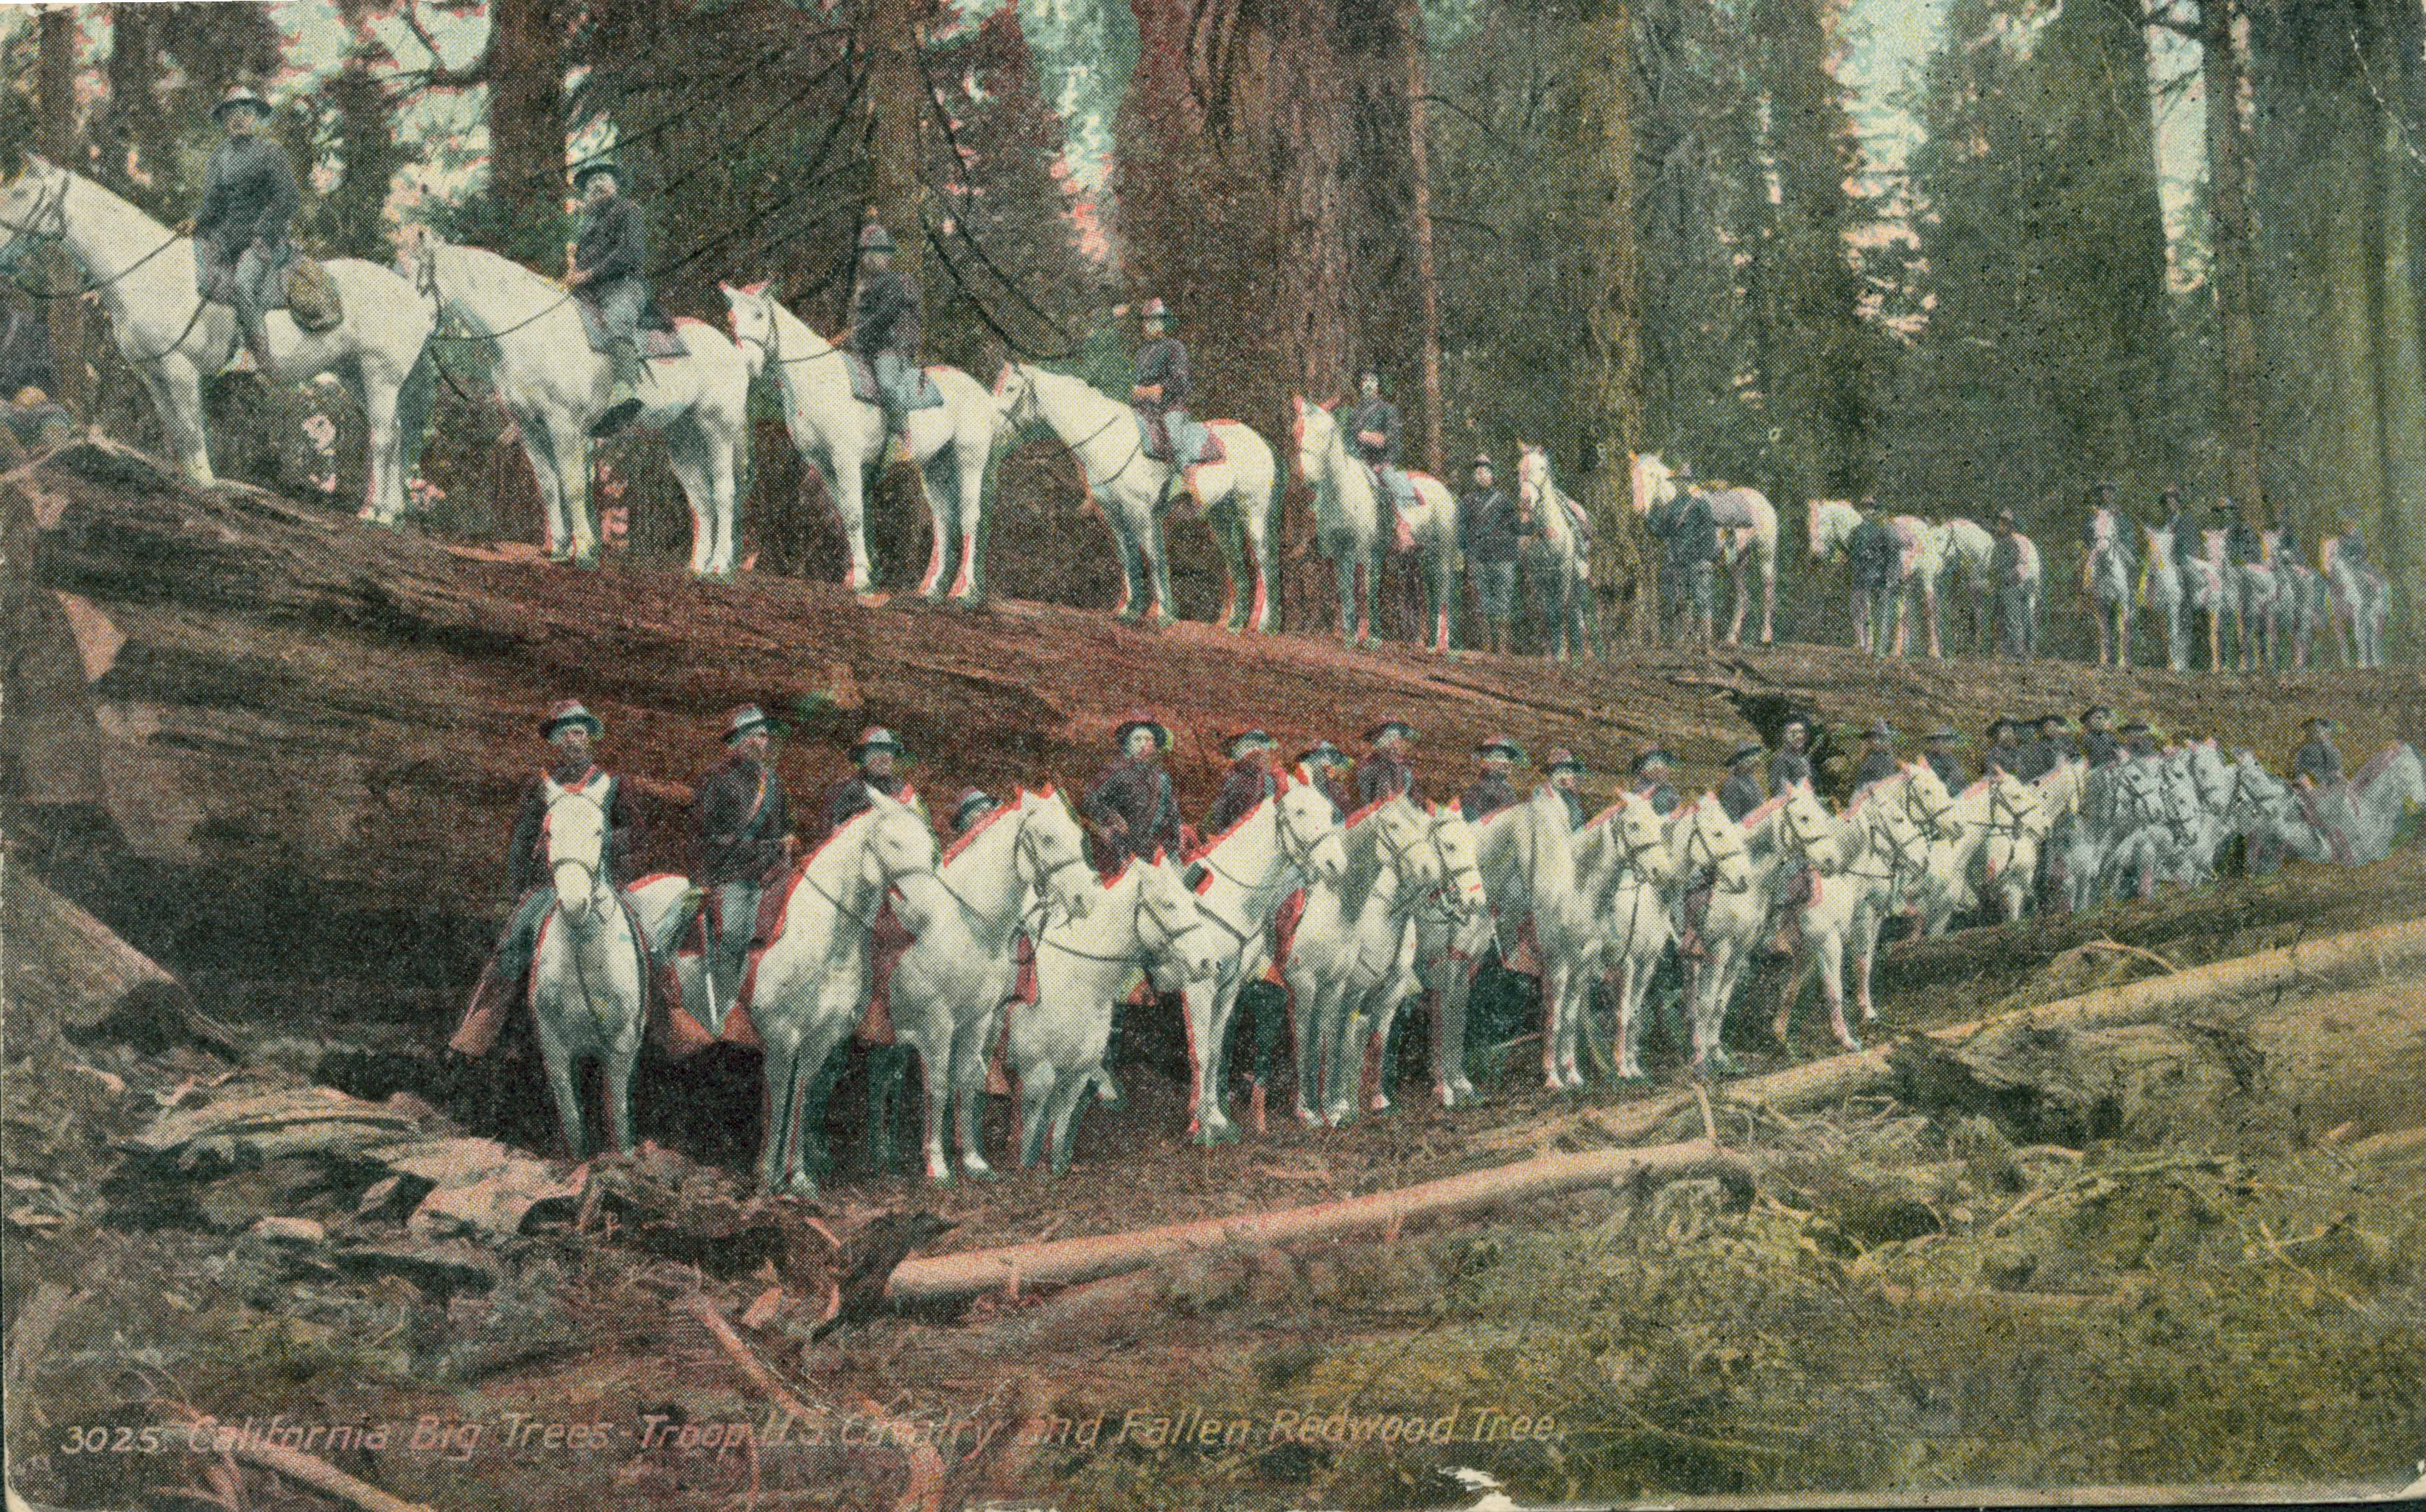 Shows a regiment of the United States cavalry and their horses posed on and around the Fallen Monarch